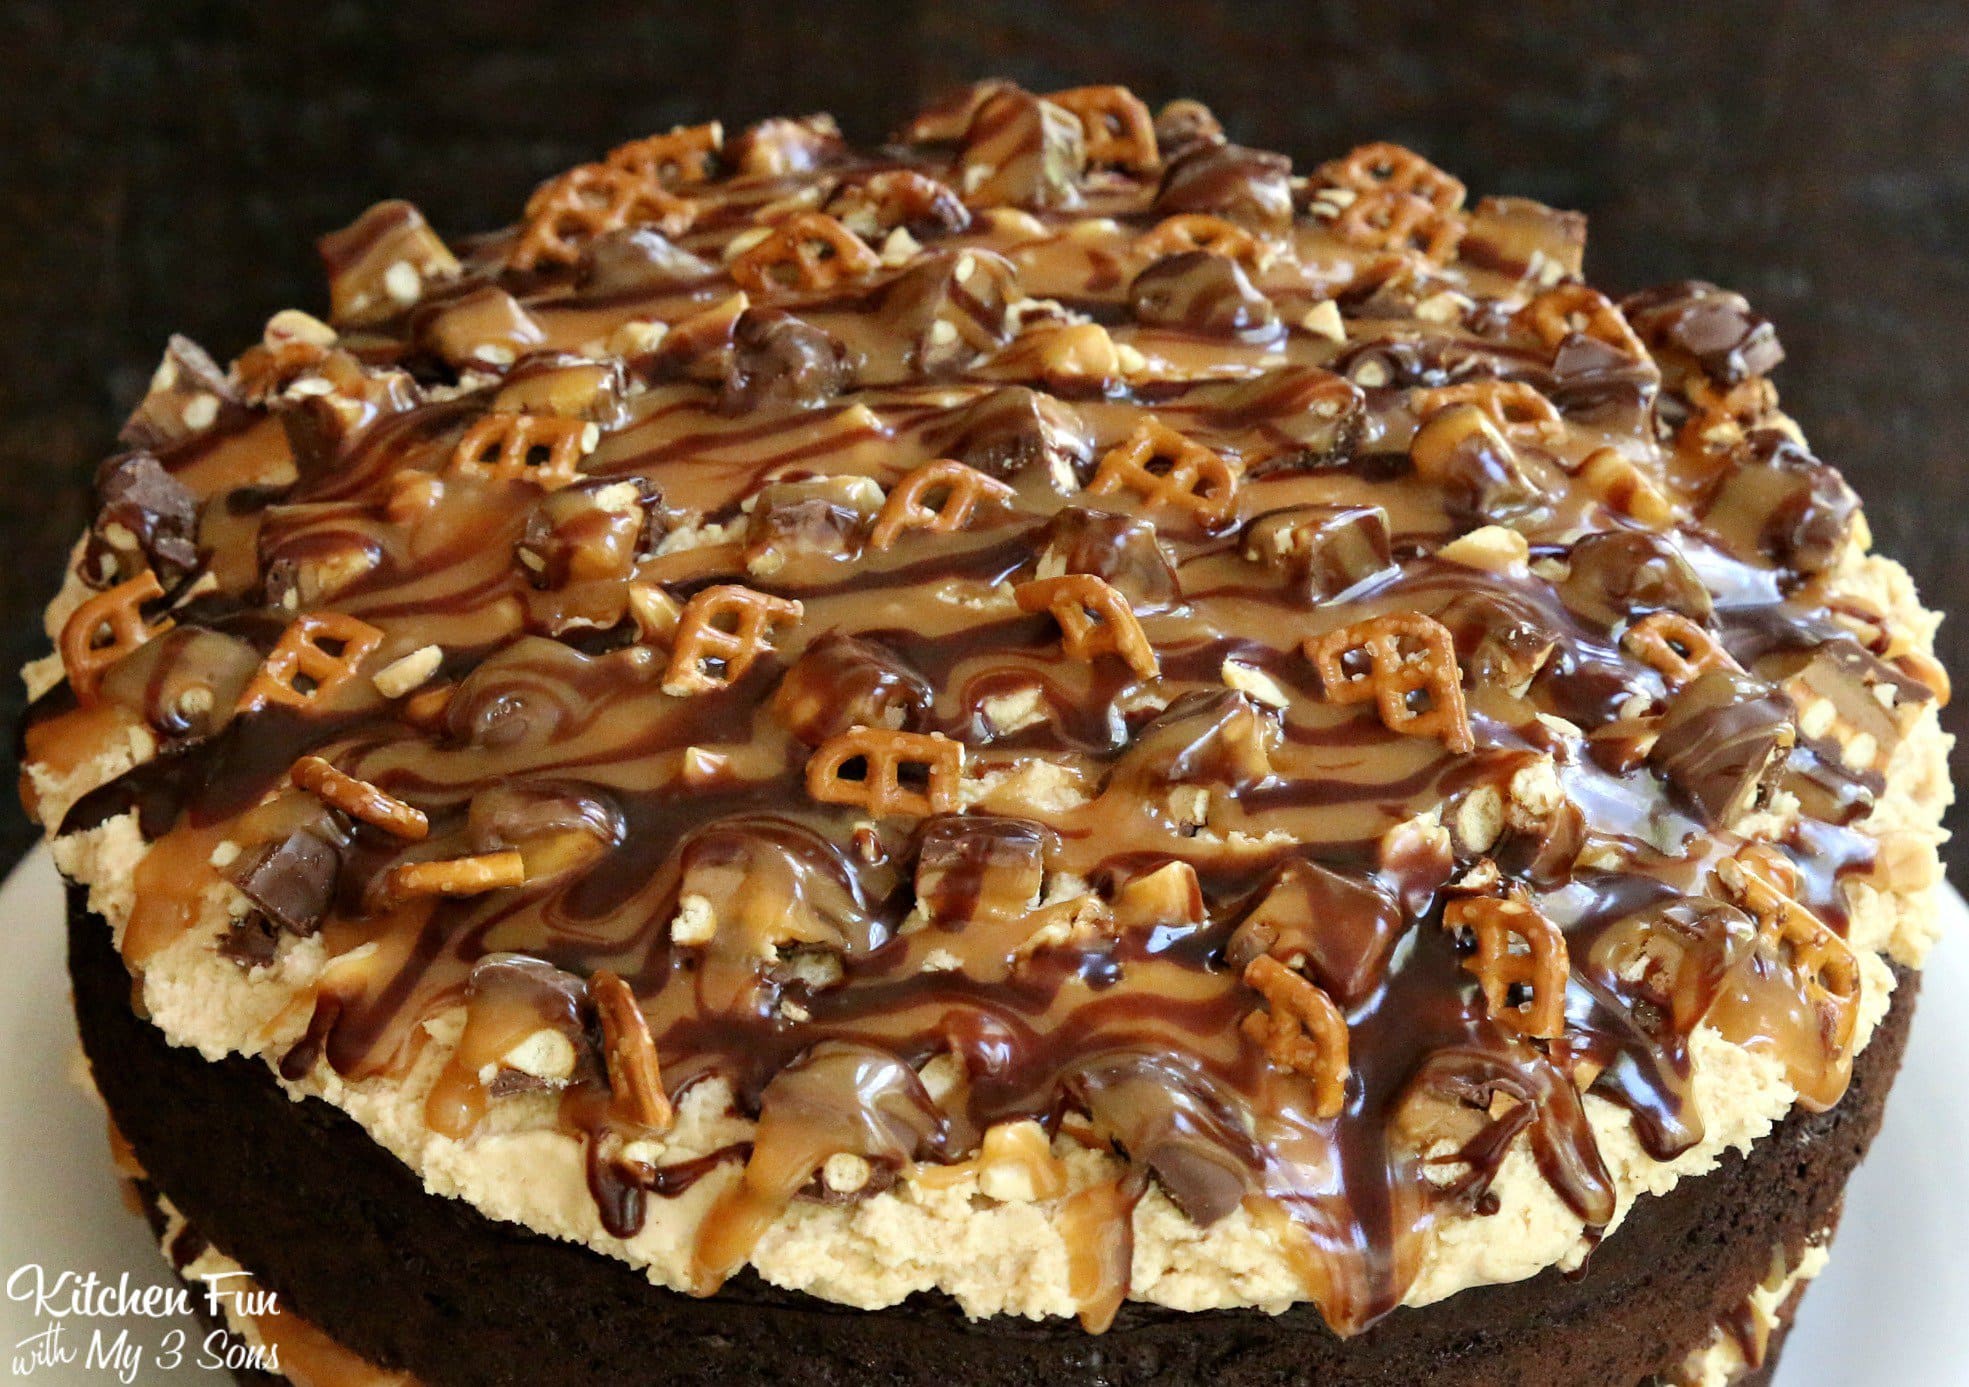 Take 5 Cake with pretzels on top.